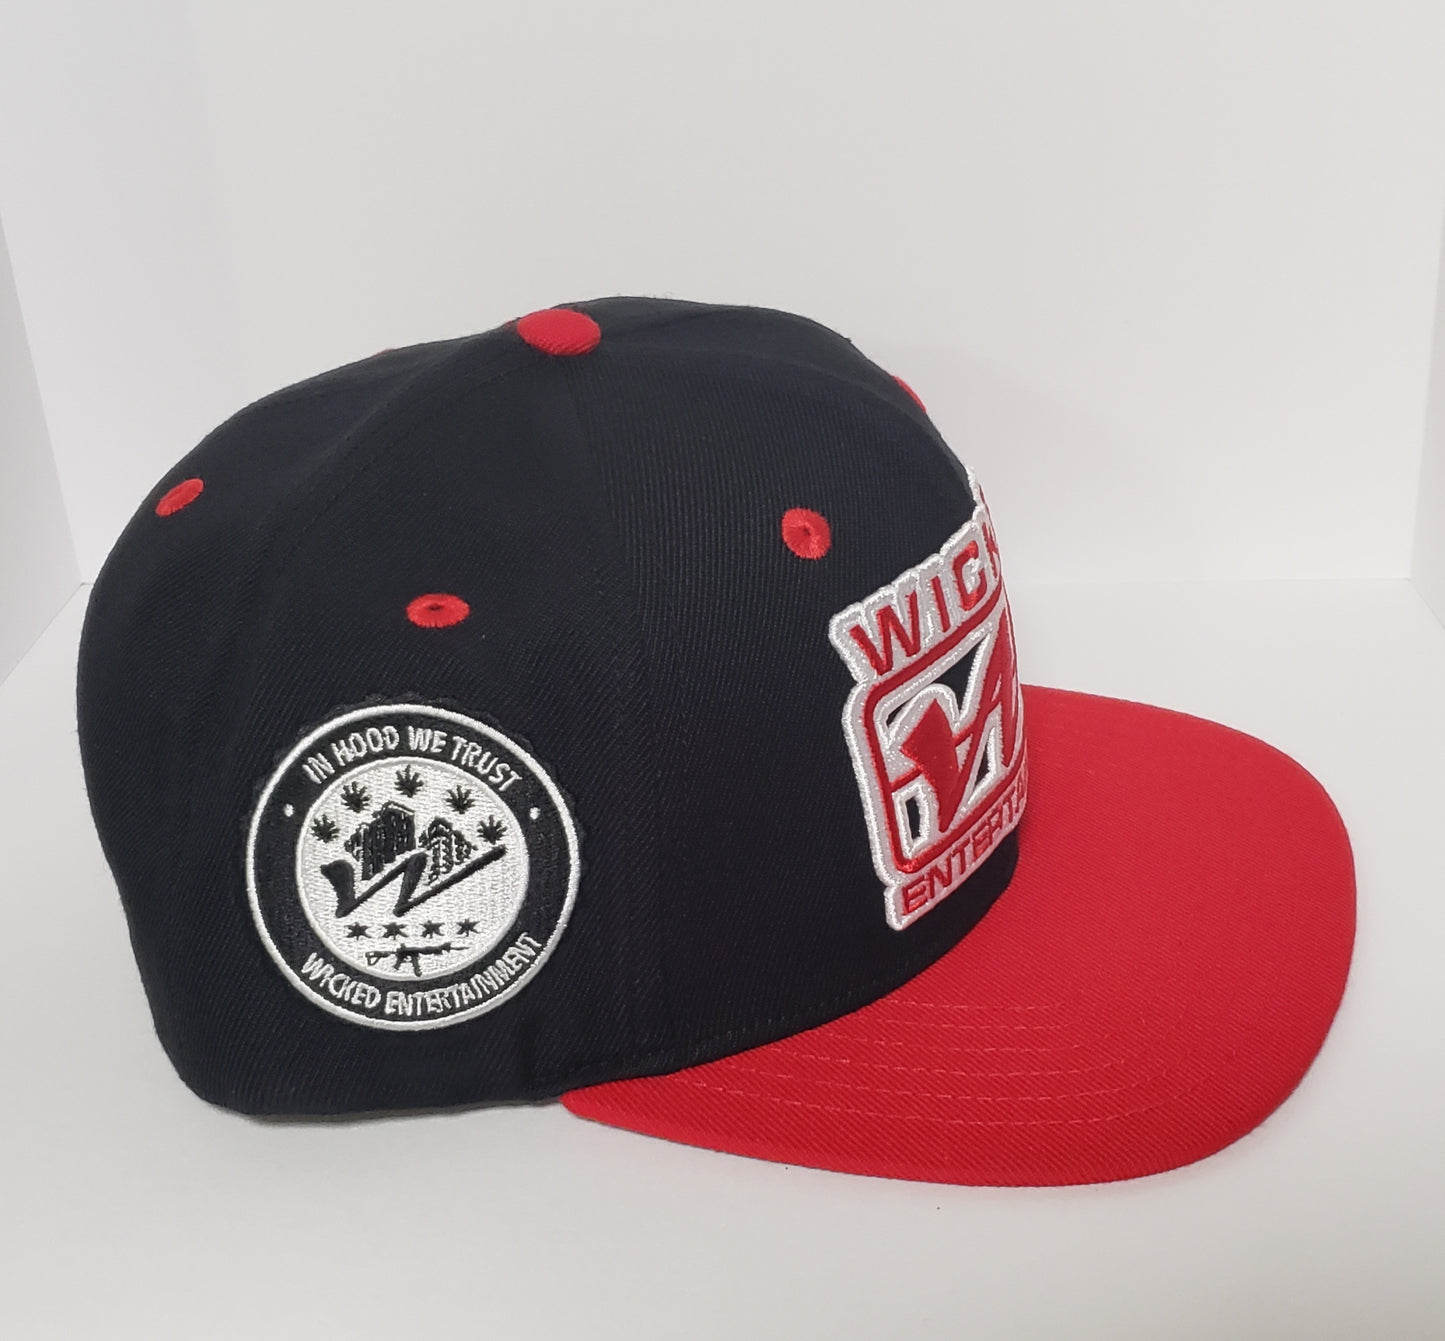 Wicked Logo Snapback hat - Black and Red with Red brim